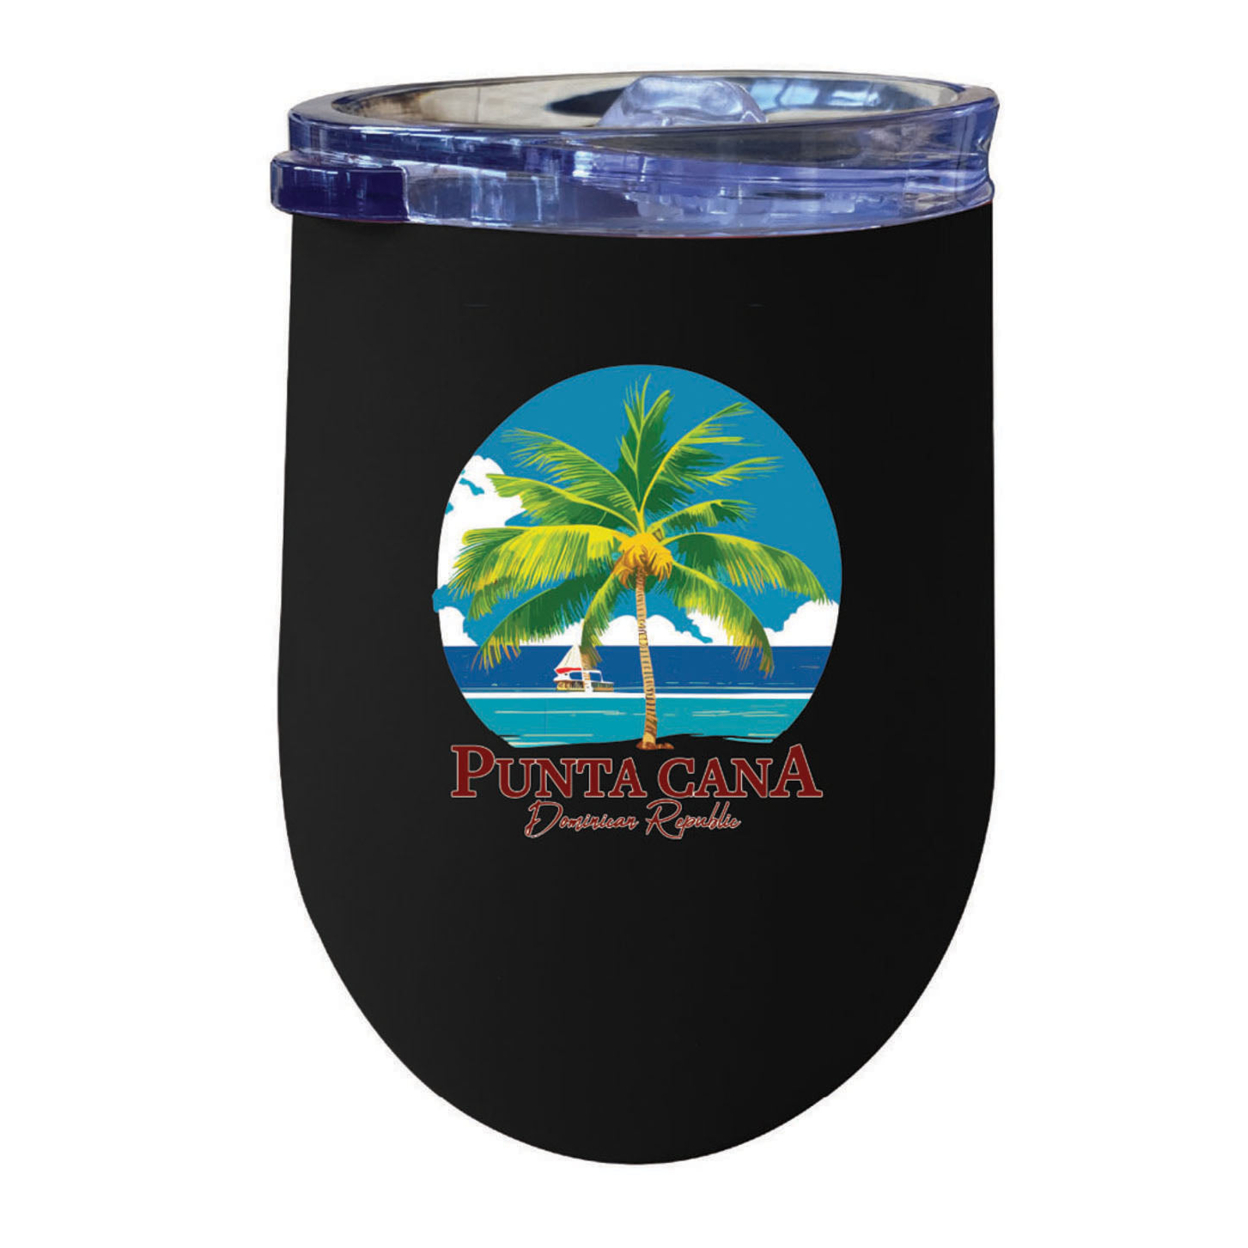 Punta Cana Dominican Republic Souvenir 12 Oz Insulated Wine Stainless Steel Tumbler - Rose Gold, PARROT B